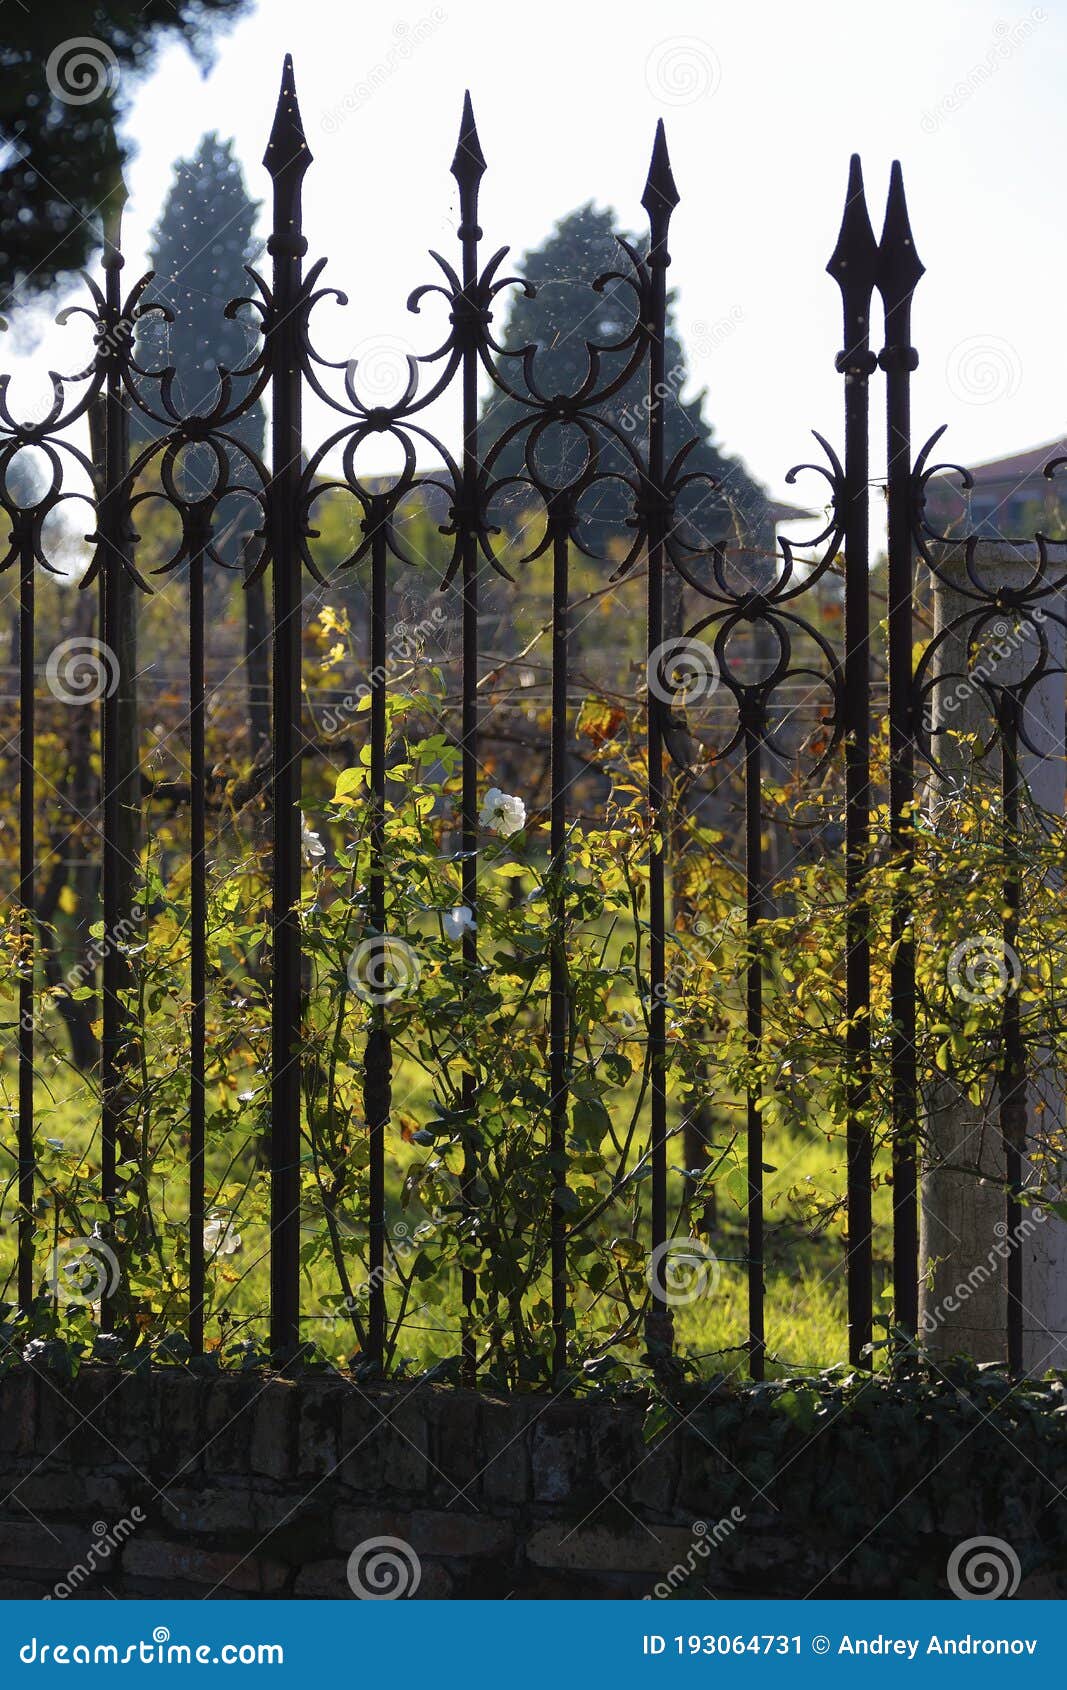 Decorative Fence in the Form of Sharp Spears Stock Image - Image of ...